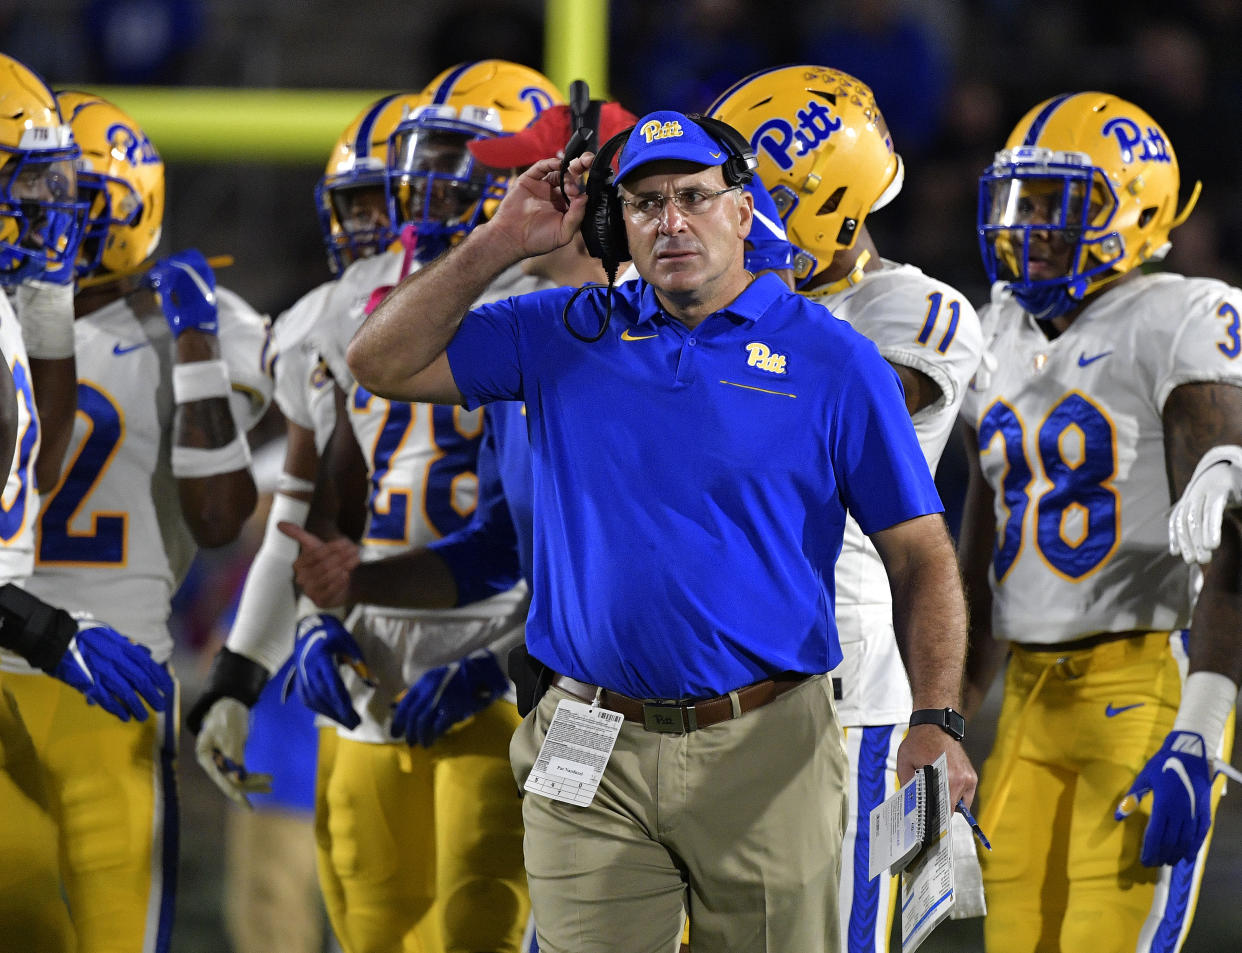 DURHAM, NORTH CAROLINA - OCTOBER 05: Head coach Pat Narduzzi of the Pittsburgh Panthers  during their game against the Duke Blue Devils at Wallace Wade Stadium on October 05, 2019 in Durham, North Carolina. Pittsburgh won 33-30. (Photo by Grant Halverson/Getty Images)